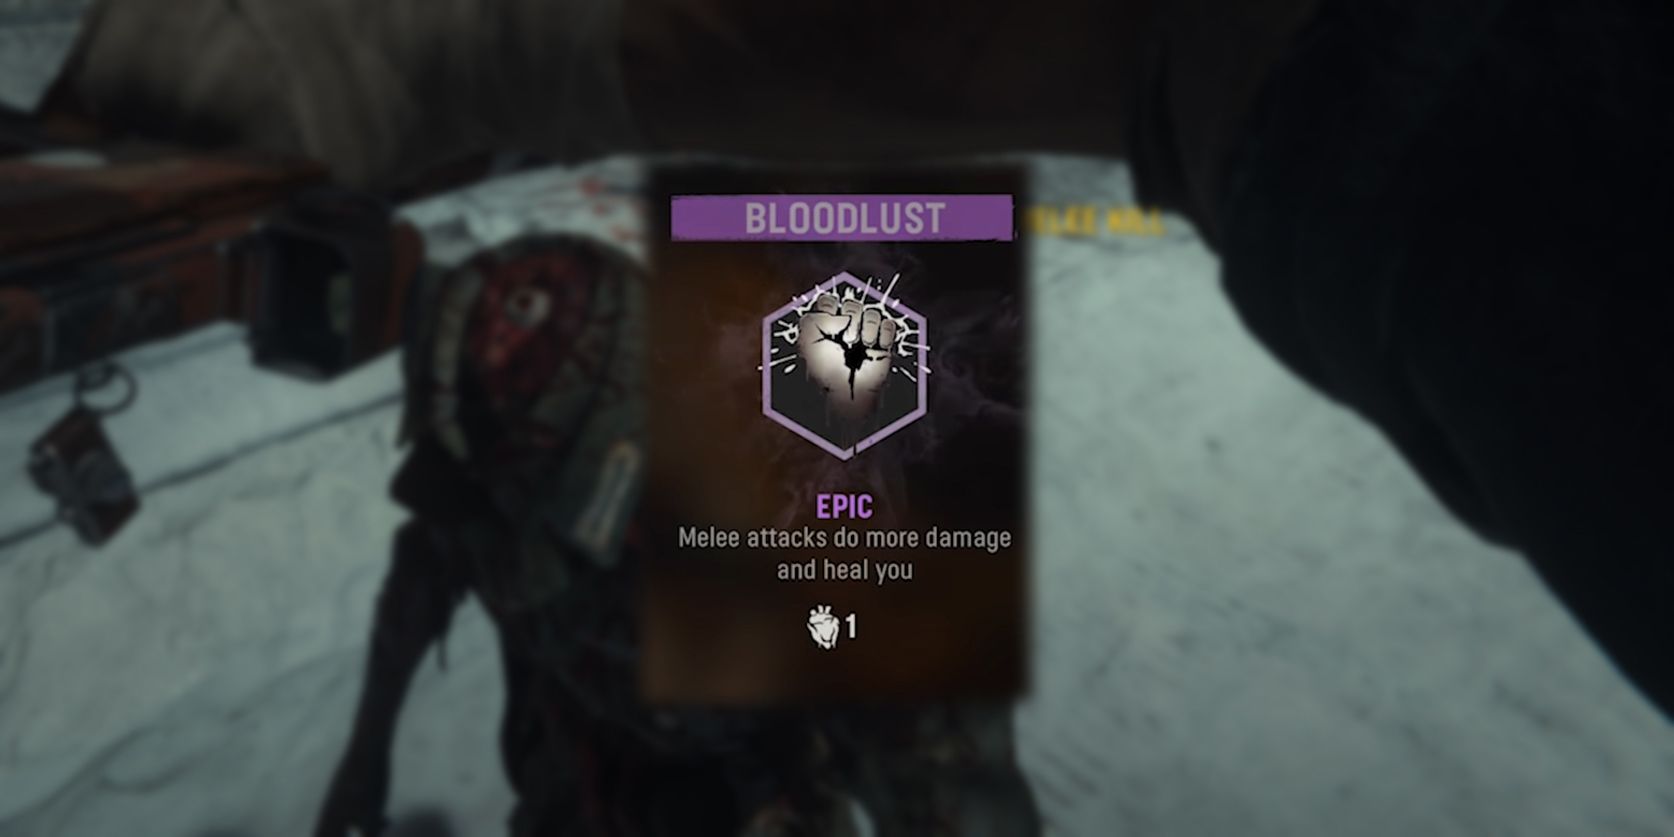 Call of Duty Vanguard Zombies - Bloodlust Description In-Game Overlaid On Image Of Operator Popping A Zombie Head With The Melee